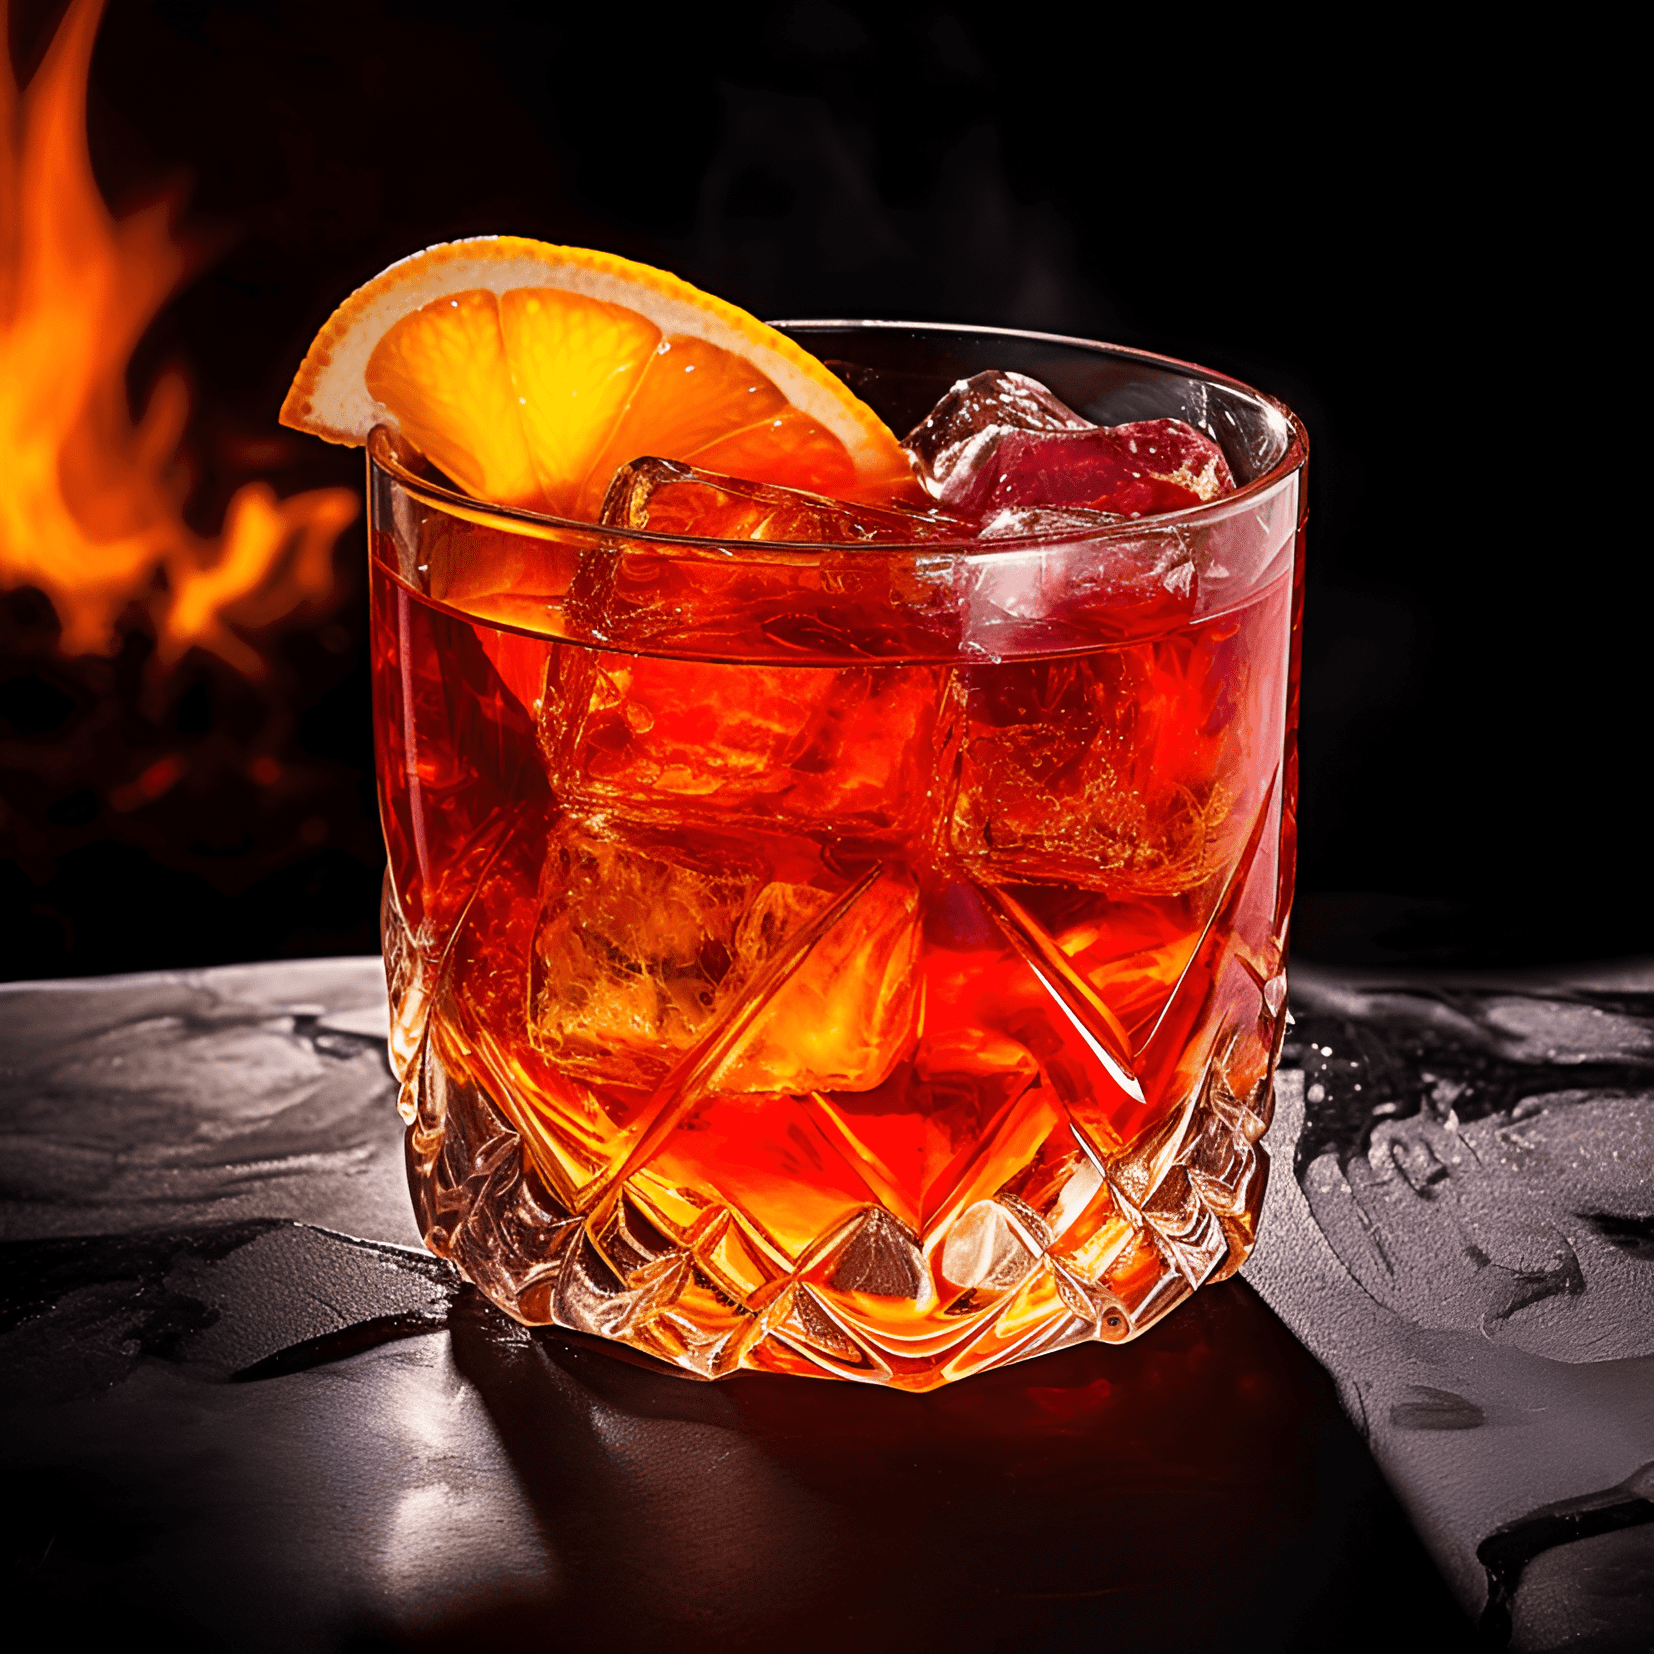 The Creole cocktail is a complex and well-balanced drink, with a sweet and fruity base, a hint of bitterness from the Campari, and a warm, spicy finish from the rye whiskey. It is both refreshing and invigorating, making it a perfect choice for a warm summer evening or a lively night out.